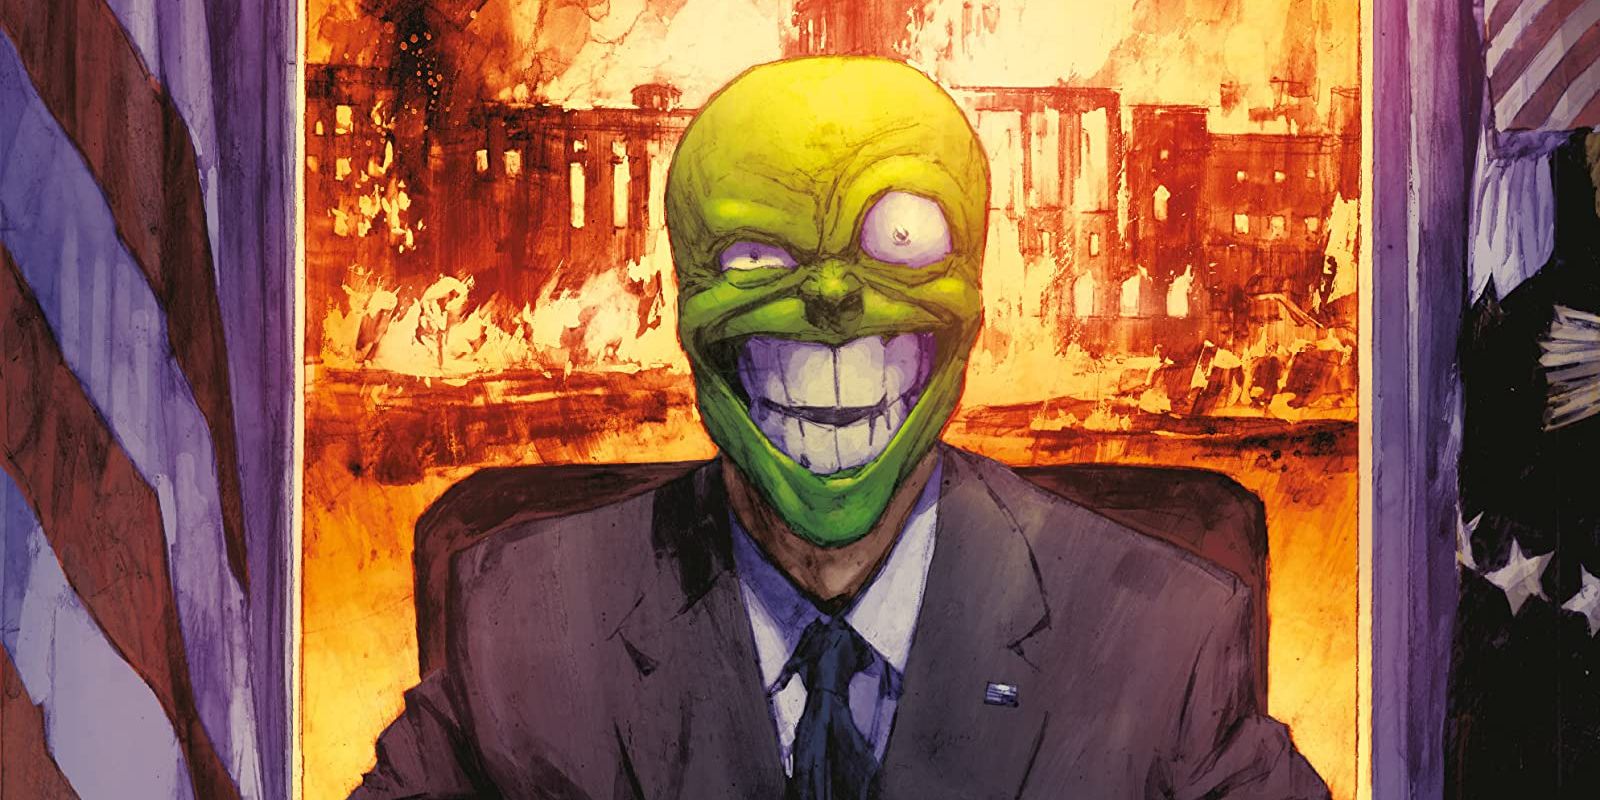 The Mask sitting in the Oval Office in The Mask comics